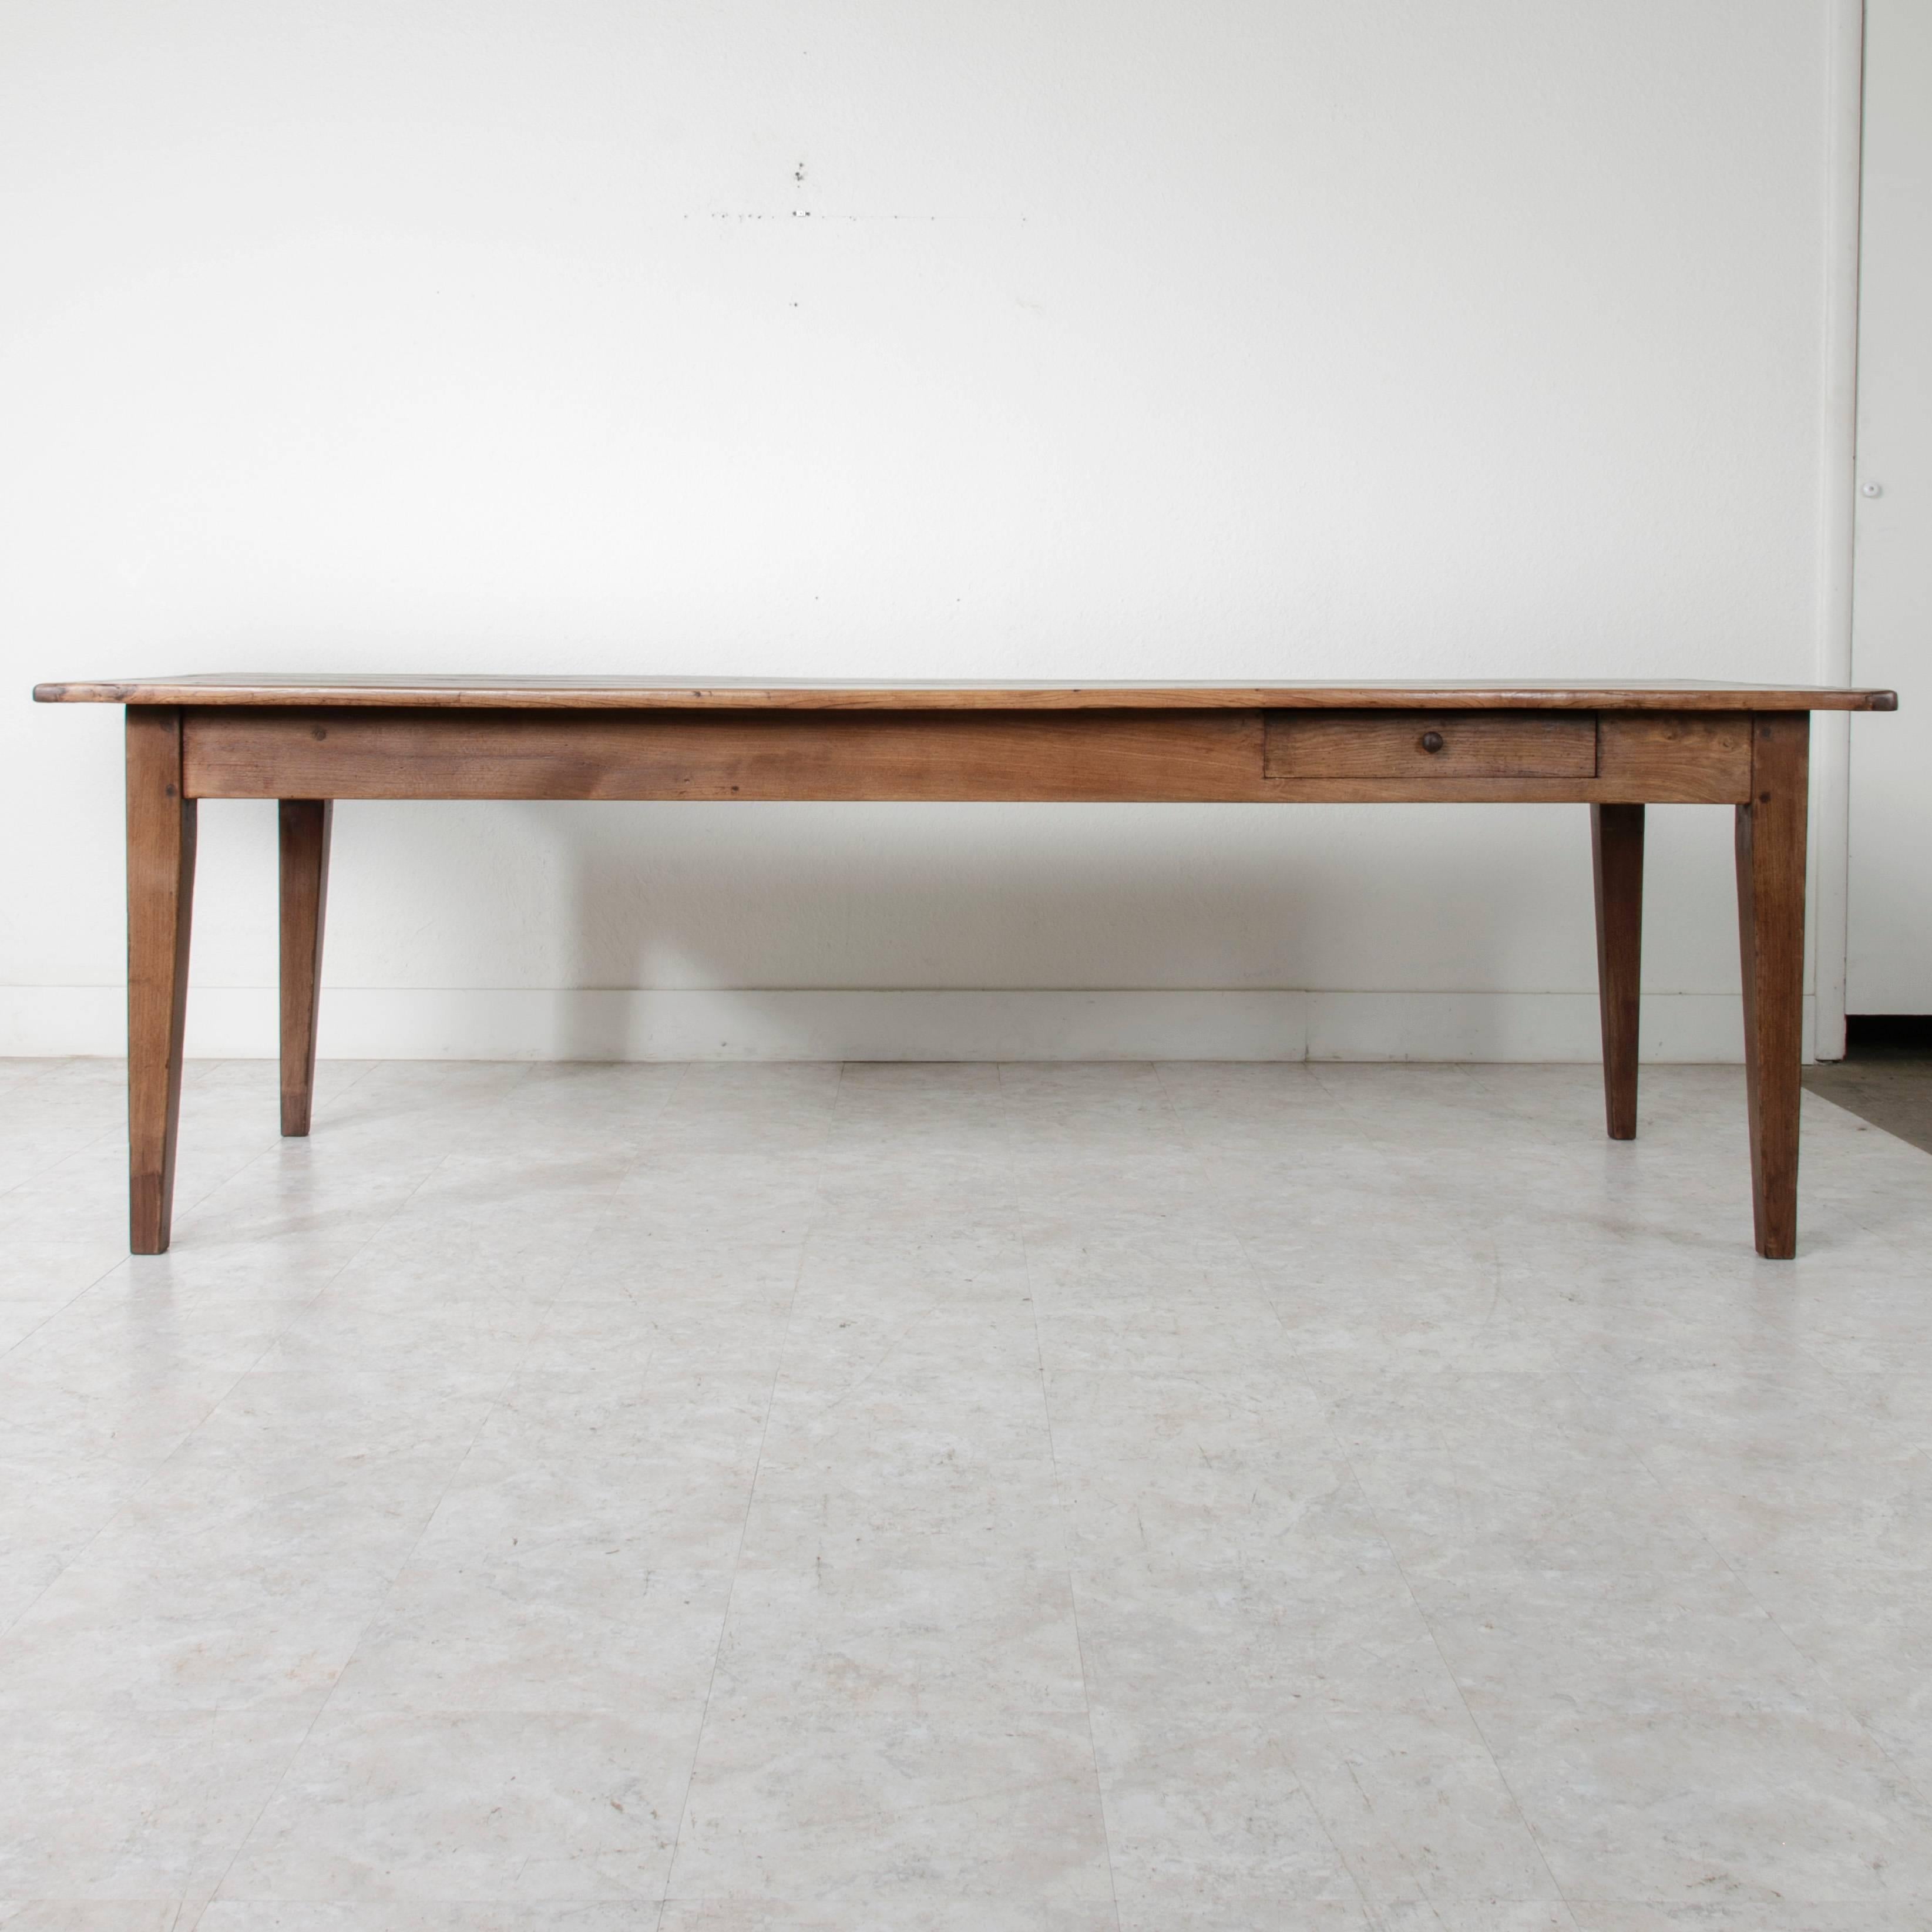 Early 20th Century Antique French Hand Pegged Oak and Elm Farm Table from Le Perche